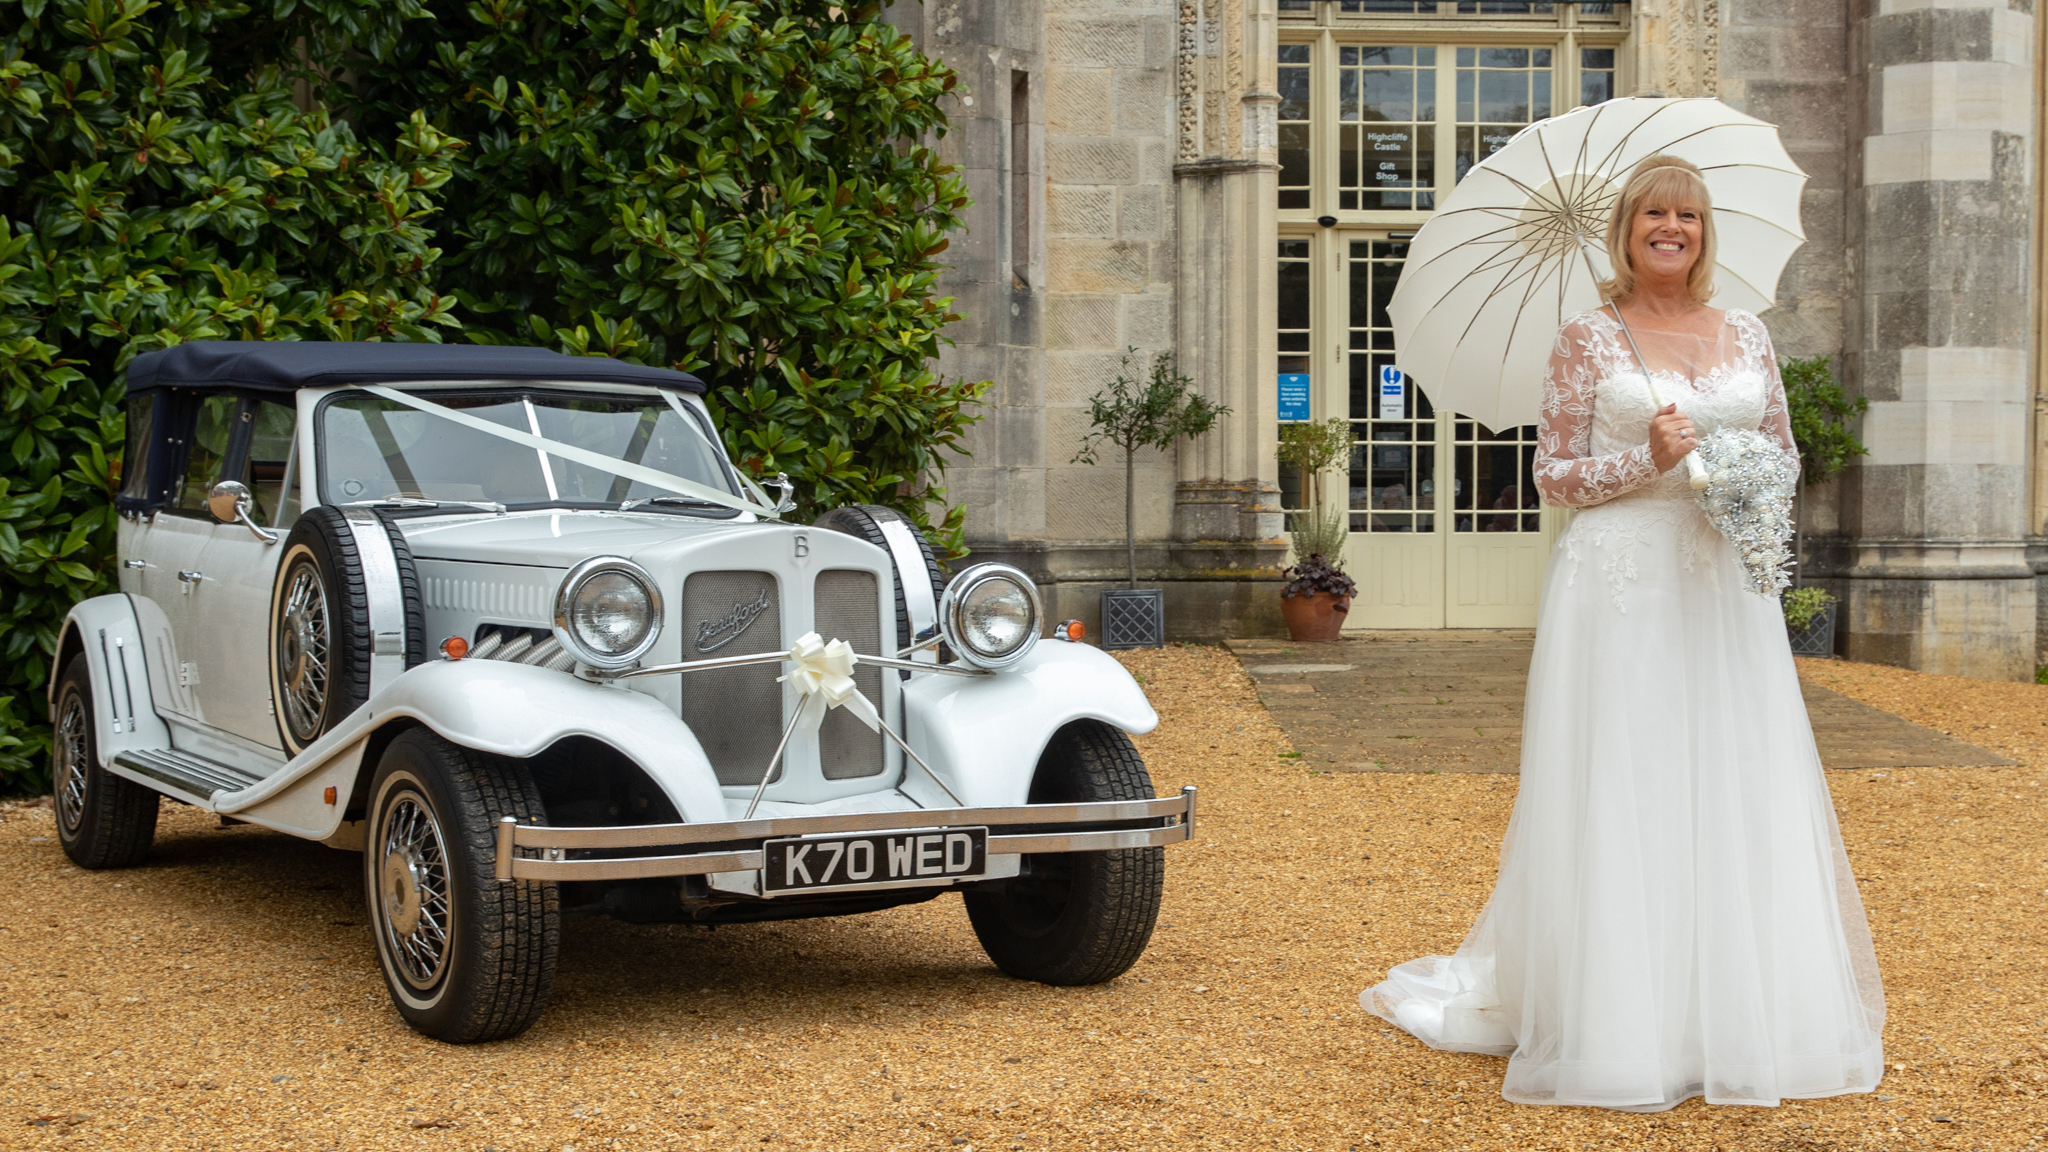 White vintage Beauford convertible with roof up decorated with white ribbon and bow at a local Ashford wedding. Smiling bride standing next to the vehicle with a white umbrella hol